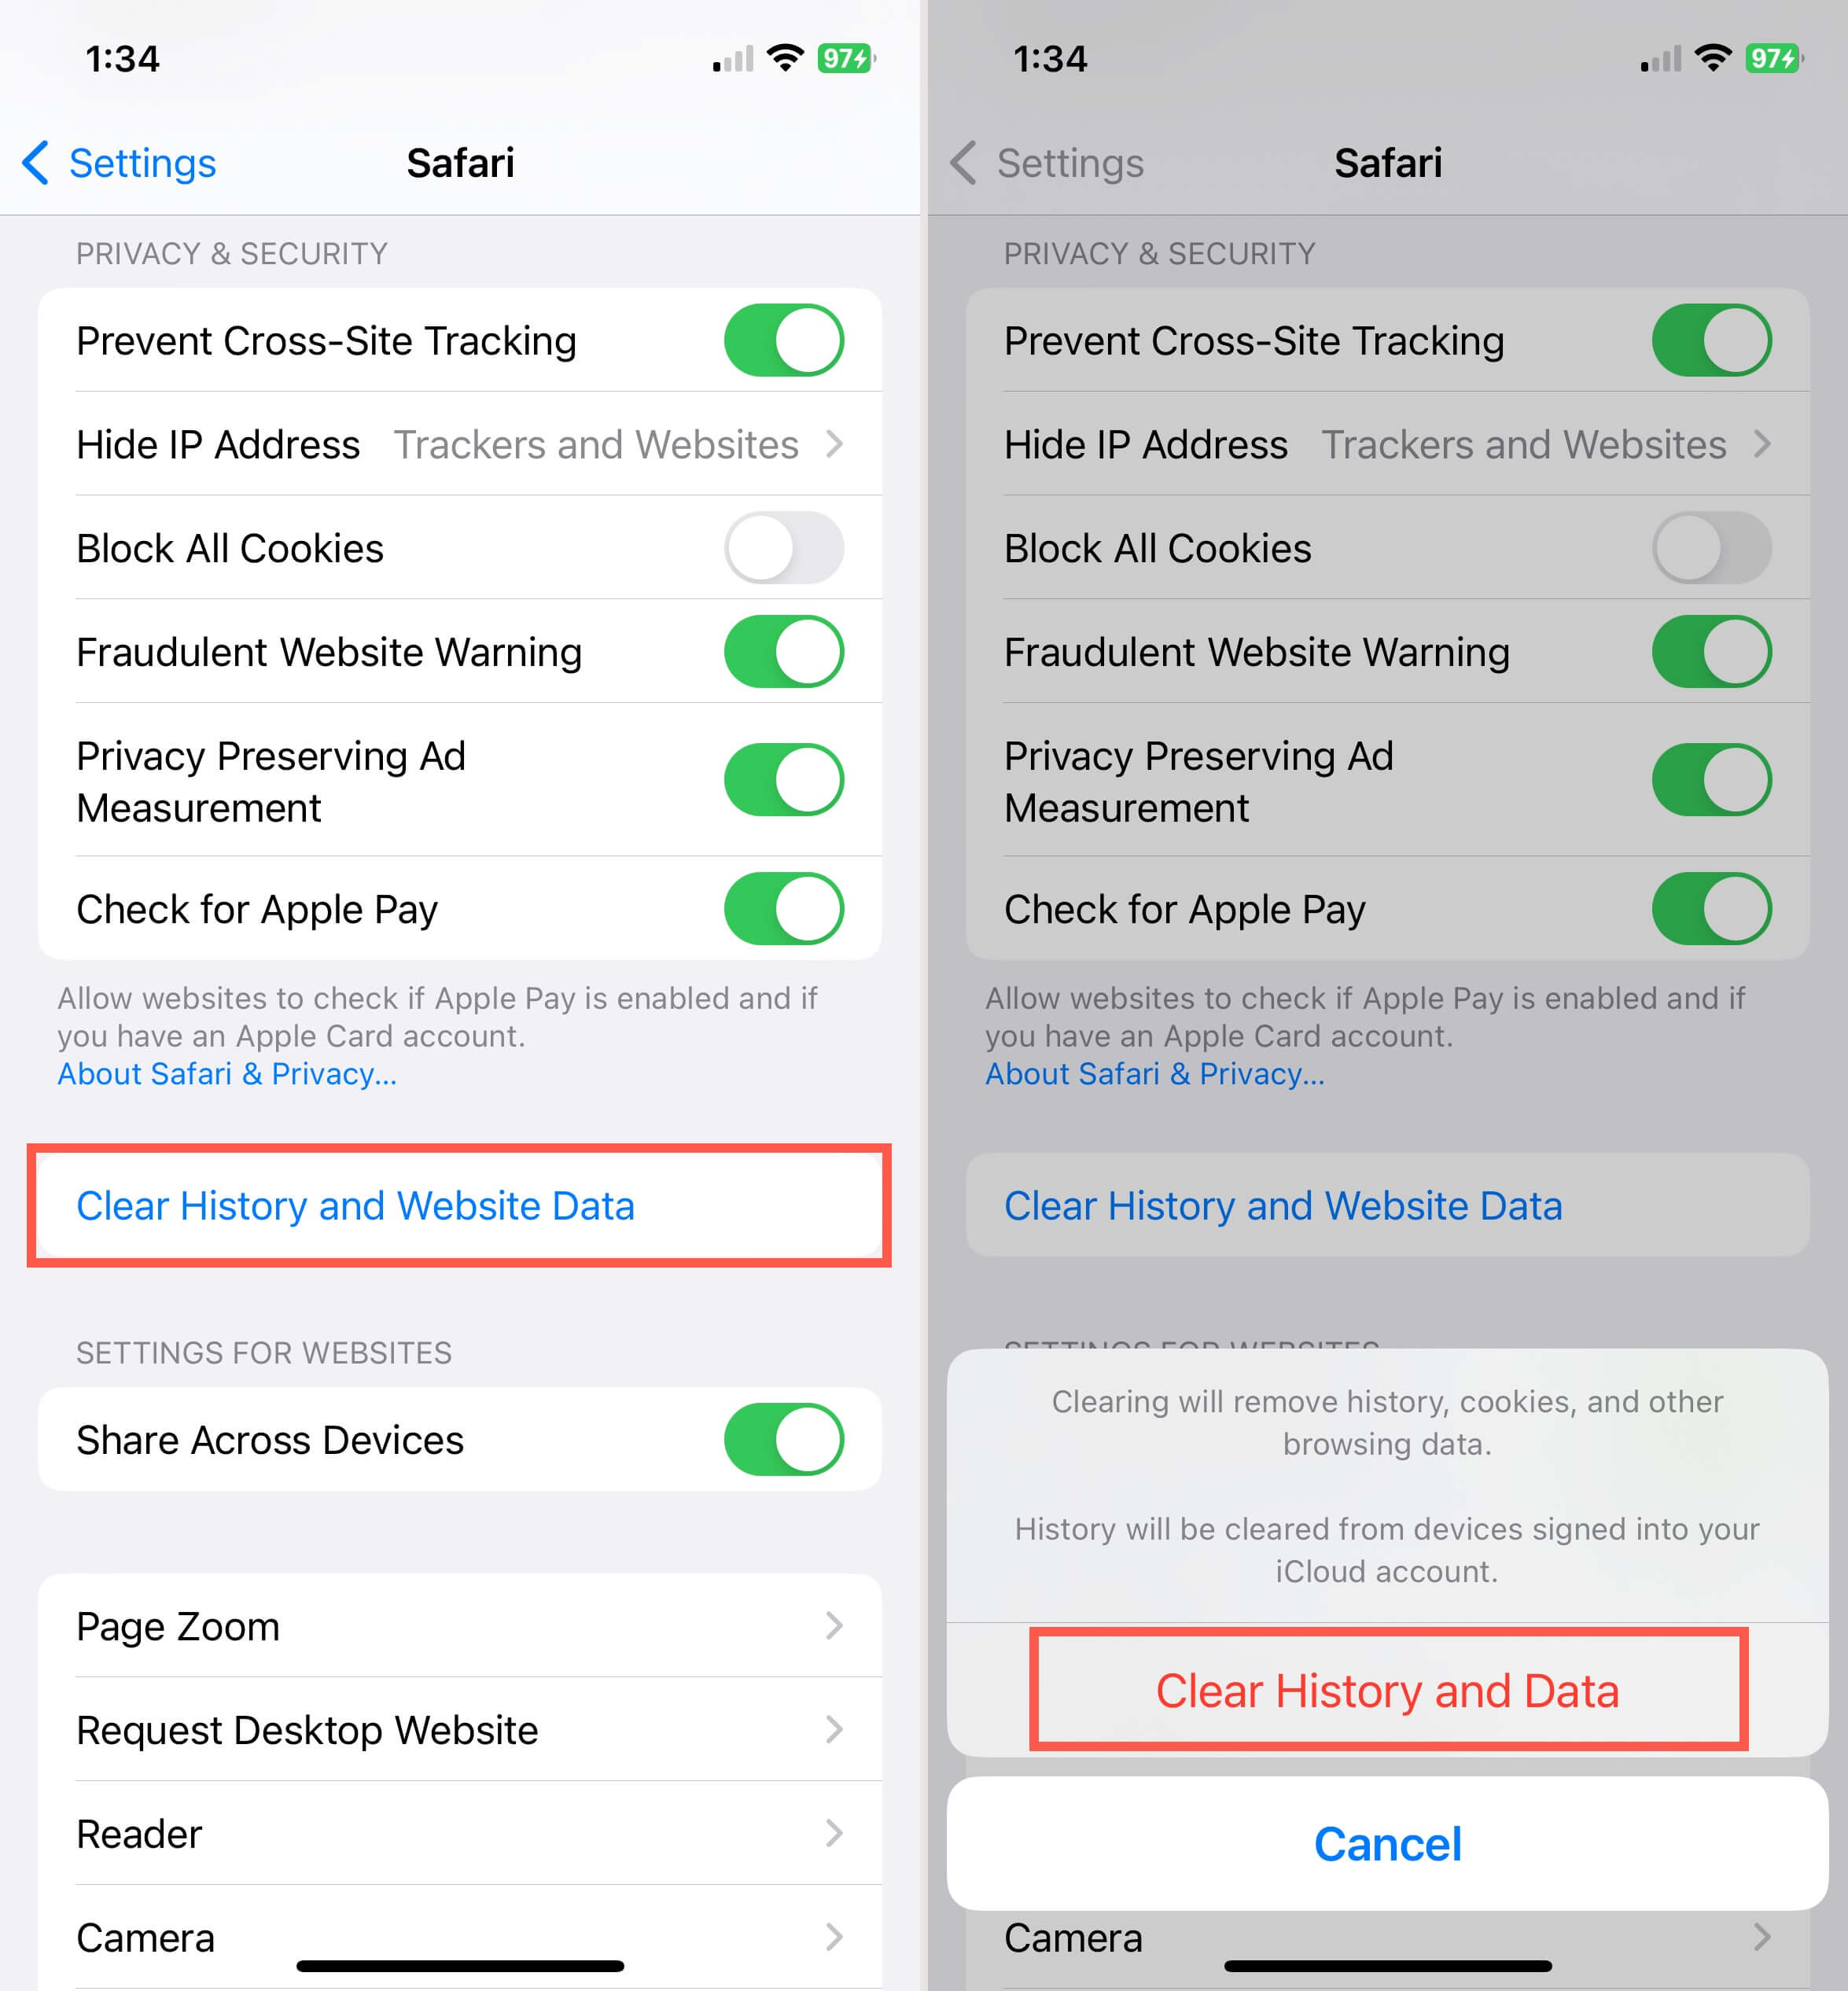 Clear History and Website Data in the Settings 